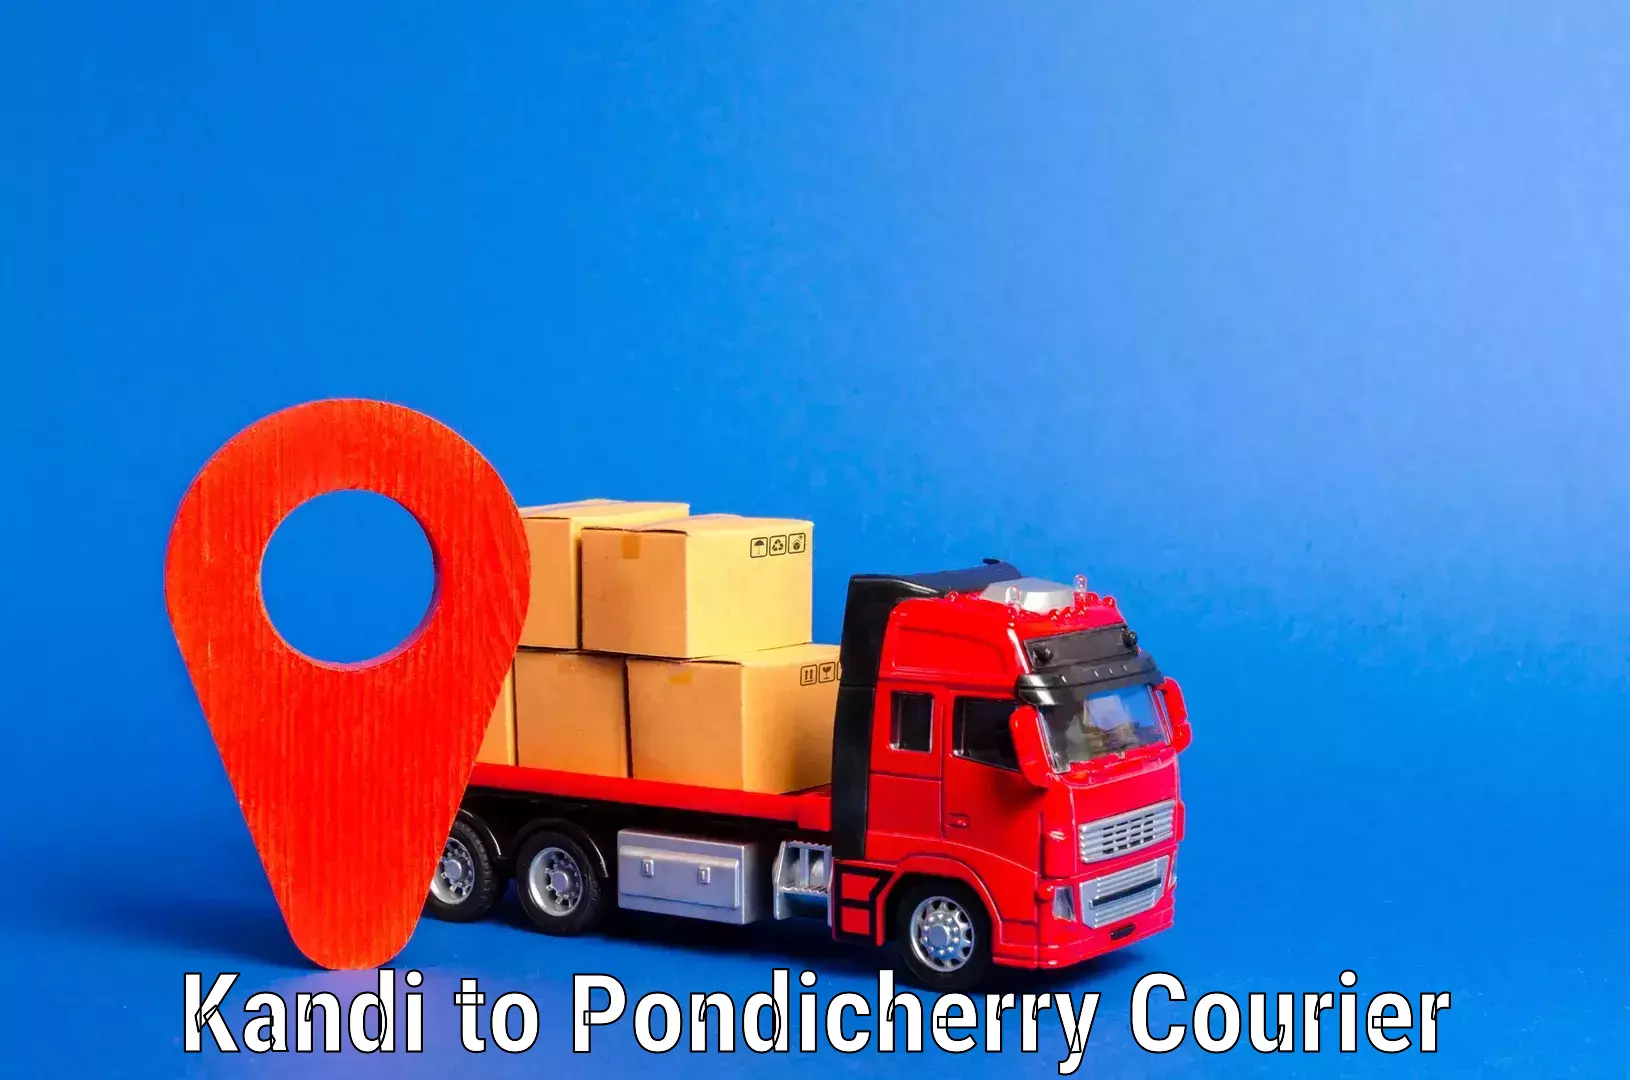 Professional furniture movers in Kandi to Pondicherry